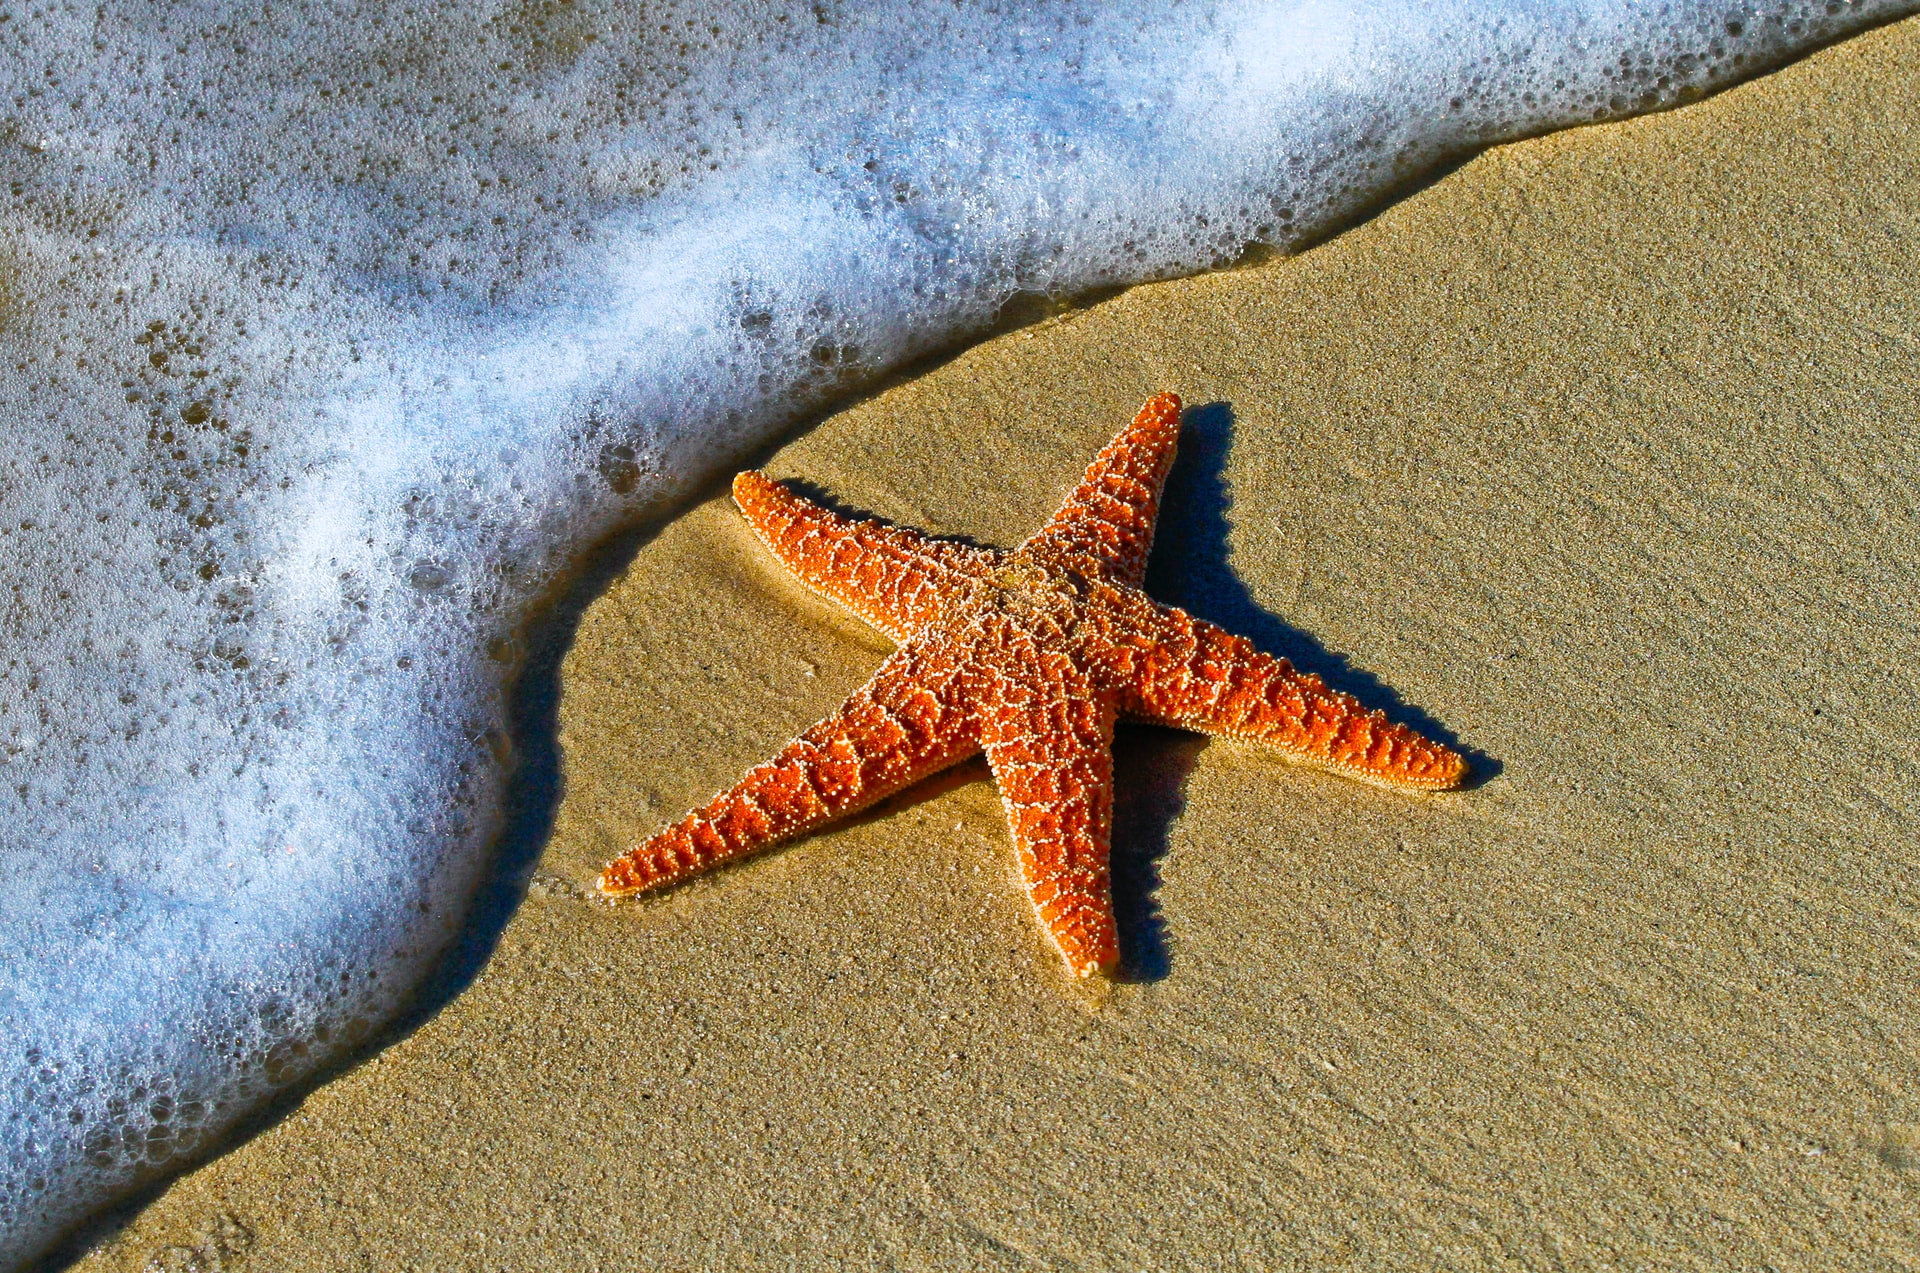 Can You Eat Starfish?